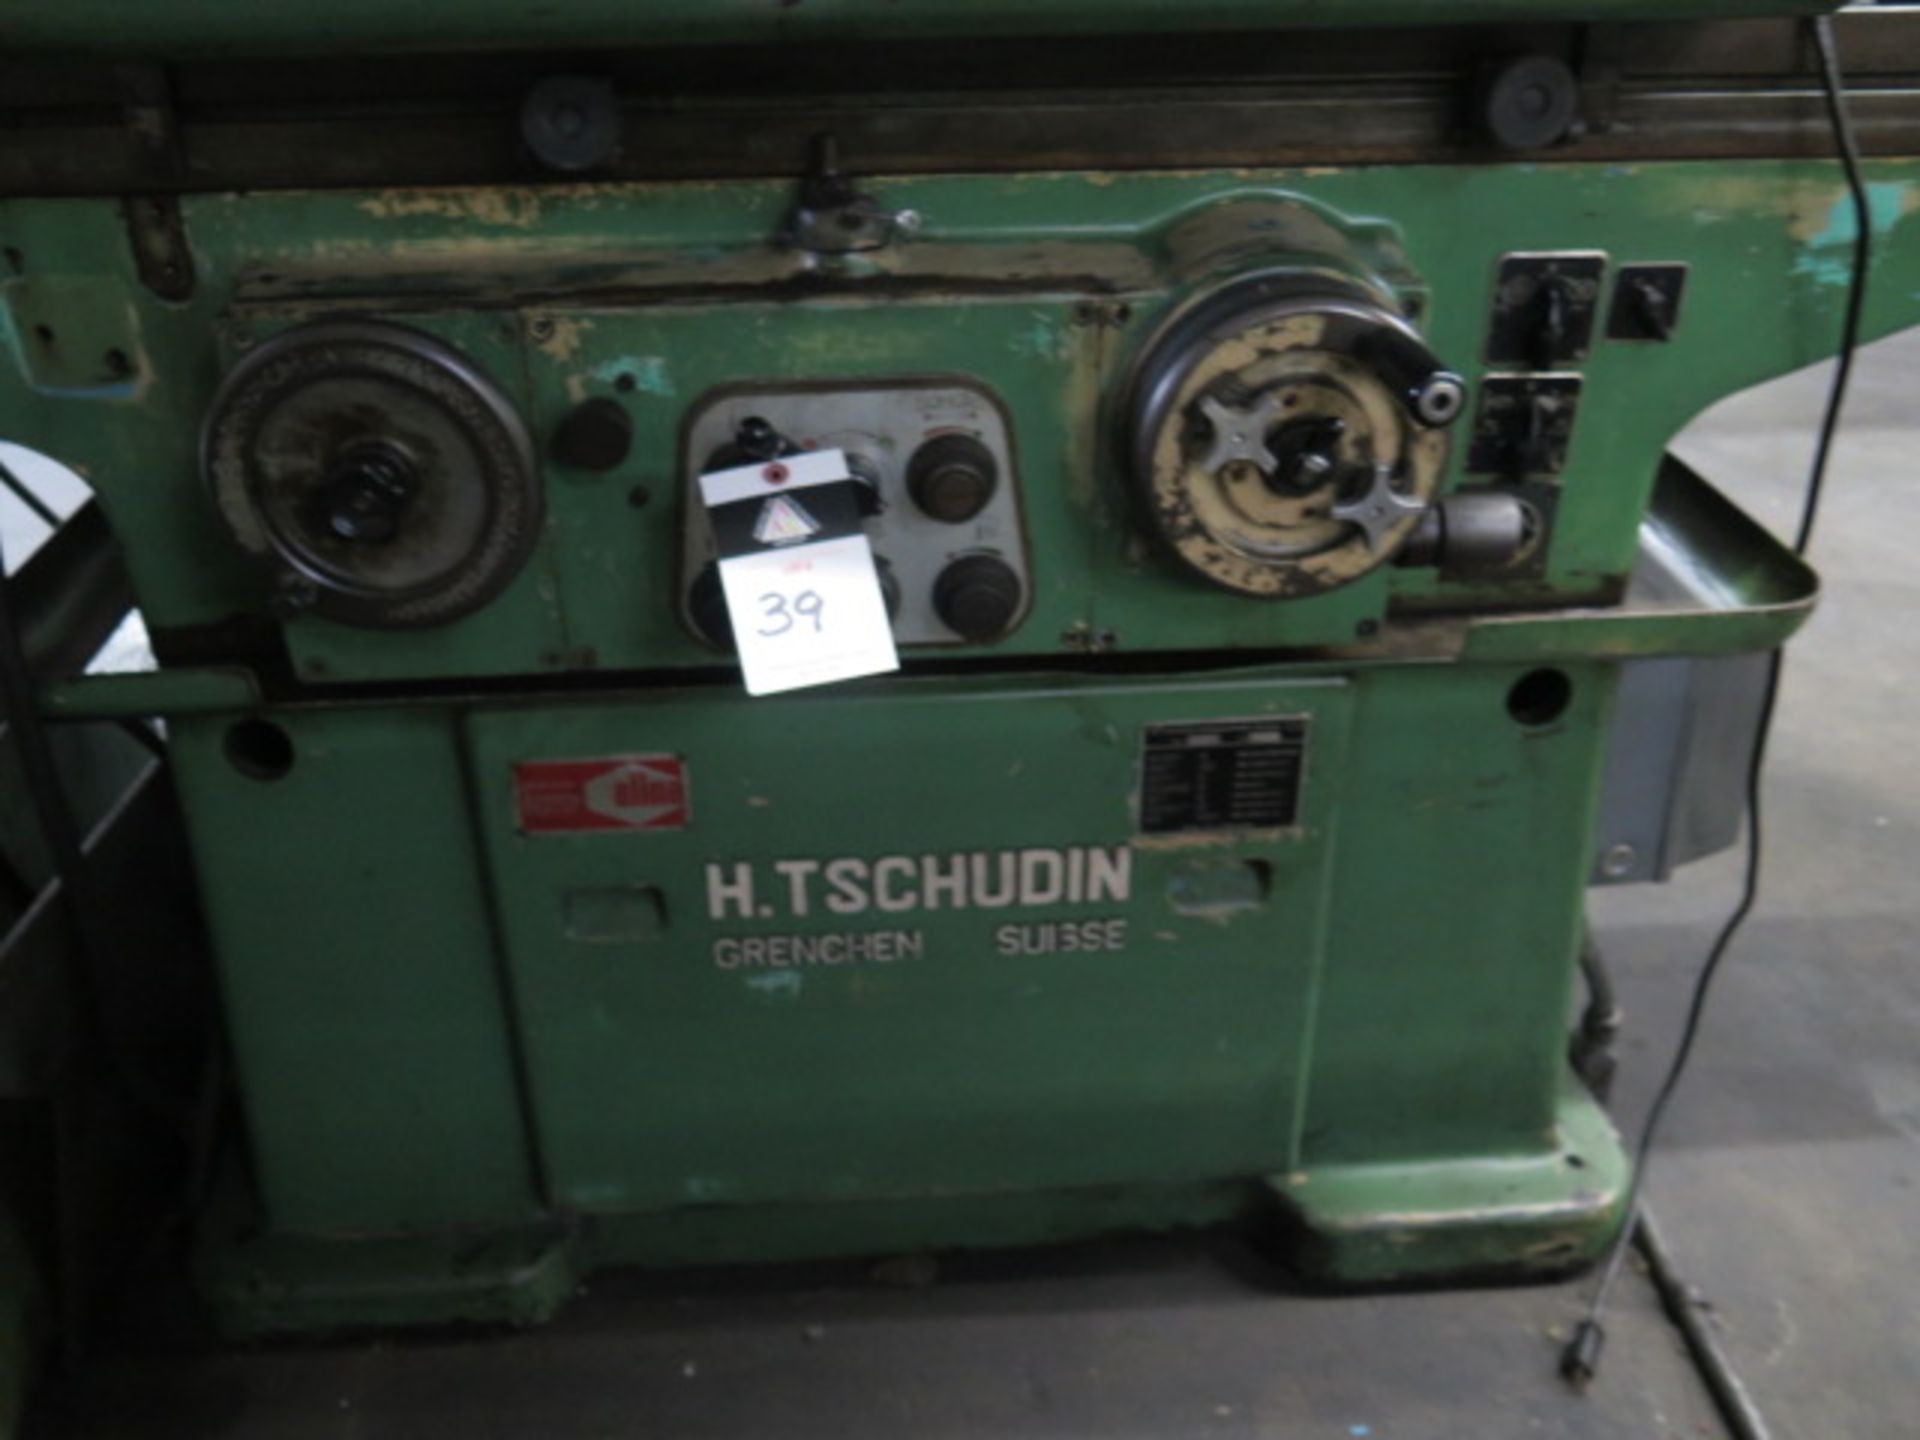 H. Tschudin HTG-600 Cylindrical Grinder s/n 68276 w/ Motorized Work Head, Tailstock, SOLD AS IS - Image 13 of 17